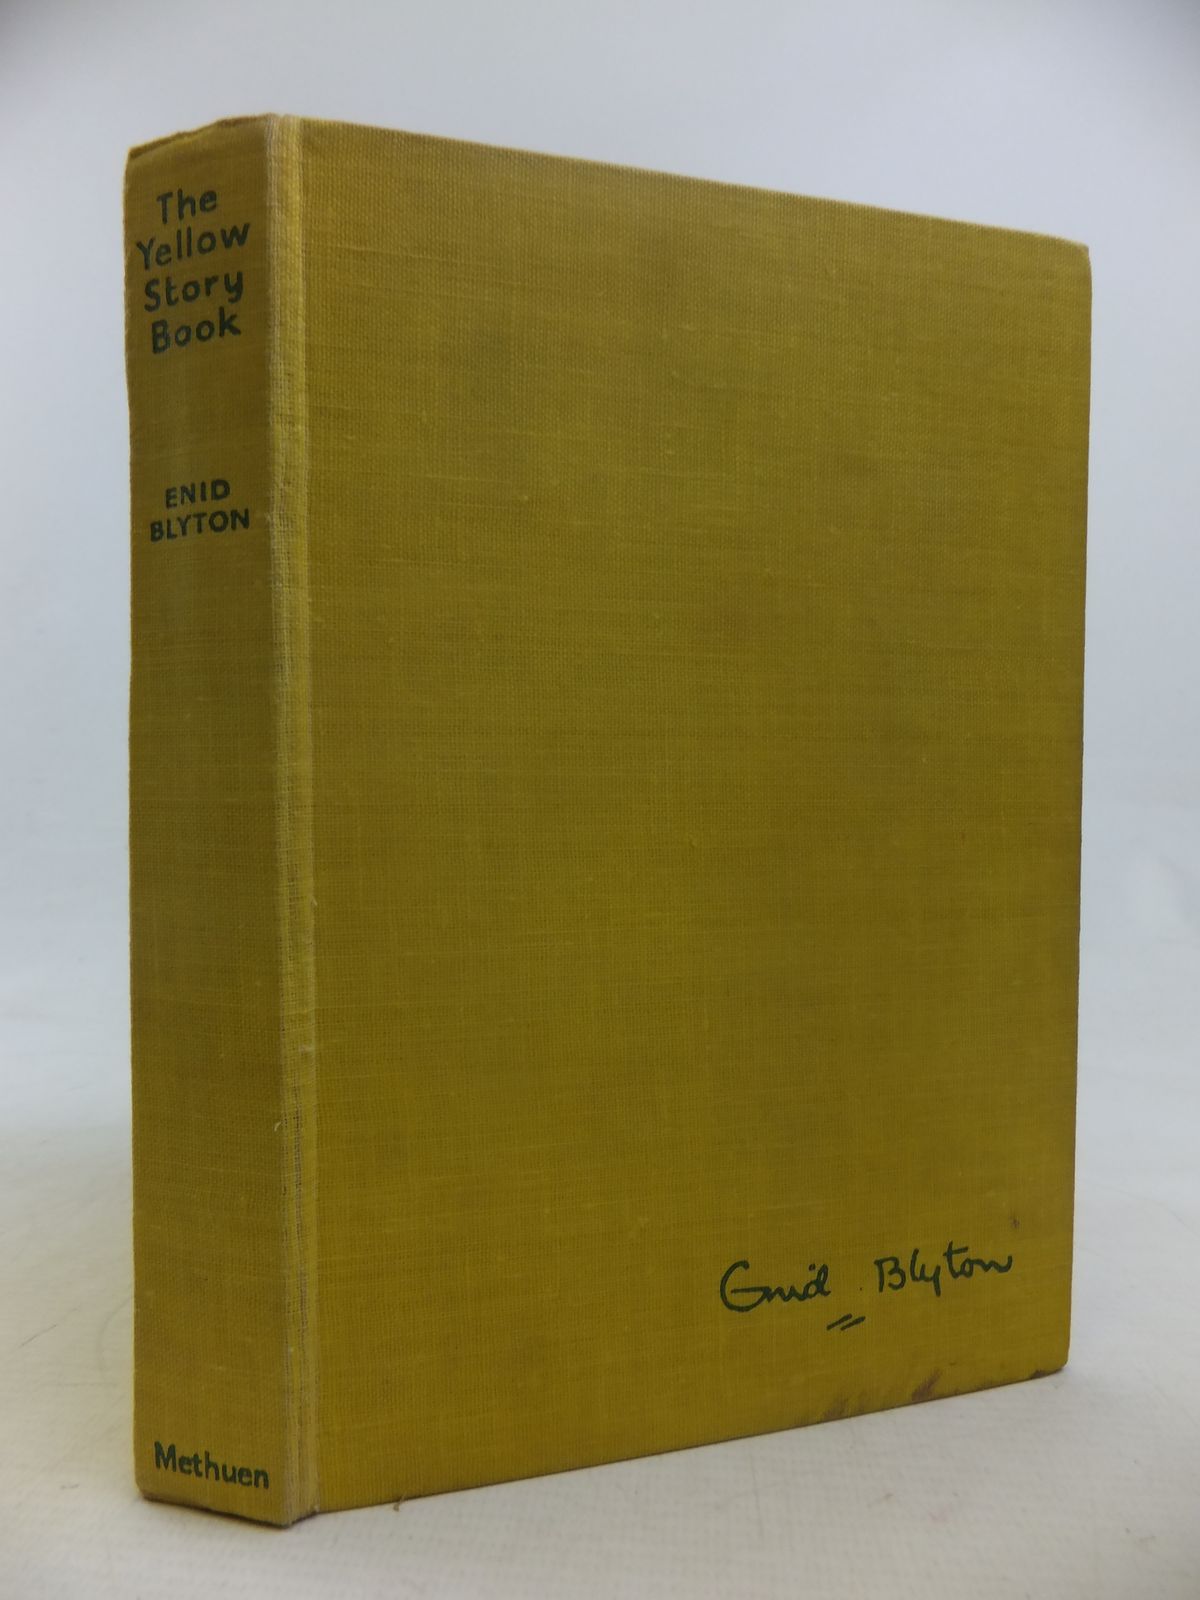 Photo of THE YELLOW STORY BOOK written by Blyton, Enid illustrated by Gell, Kathleen published by Methuen & Co. Ltd. (STOCK CODE: 2116885)  for sale by Stella & Rose's Books